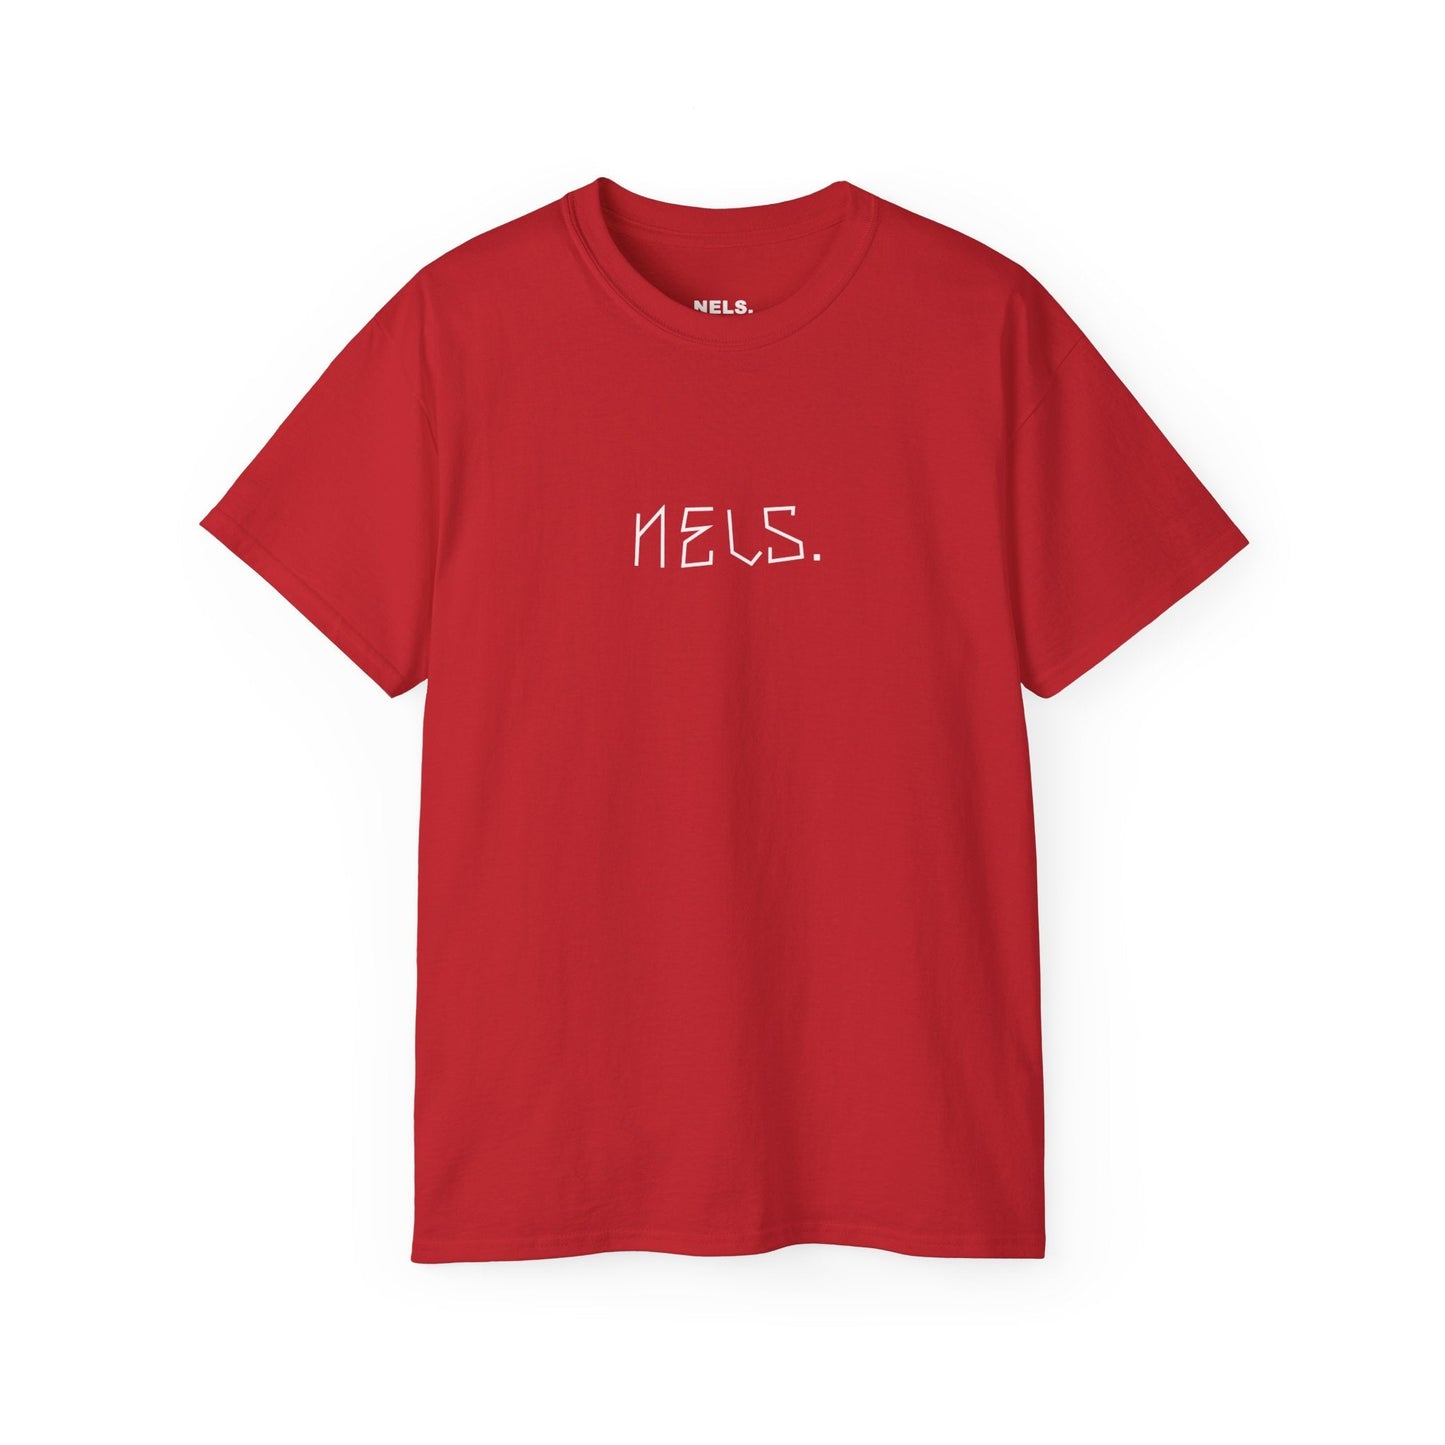 Tee NELS. END OF THE WORLD Front and Back - NELS.